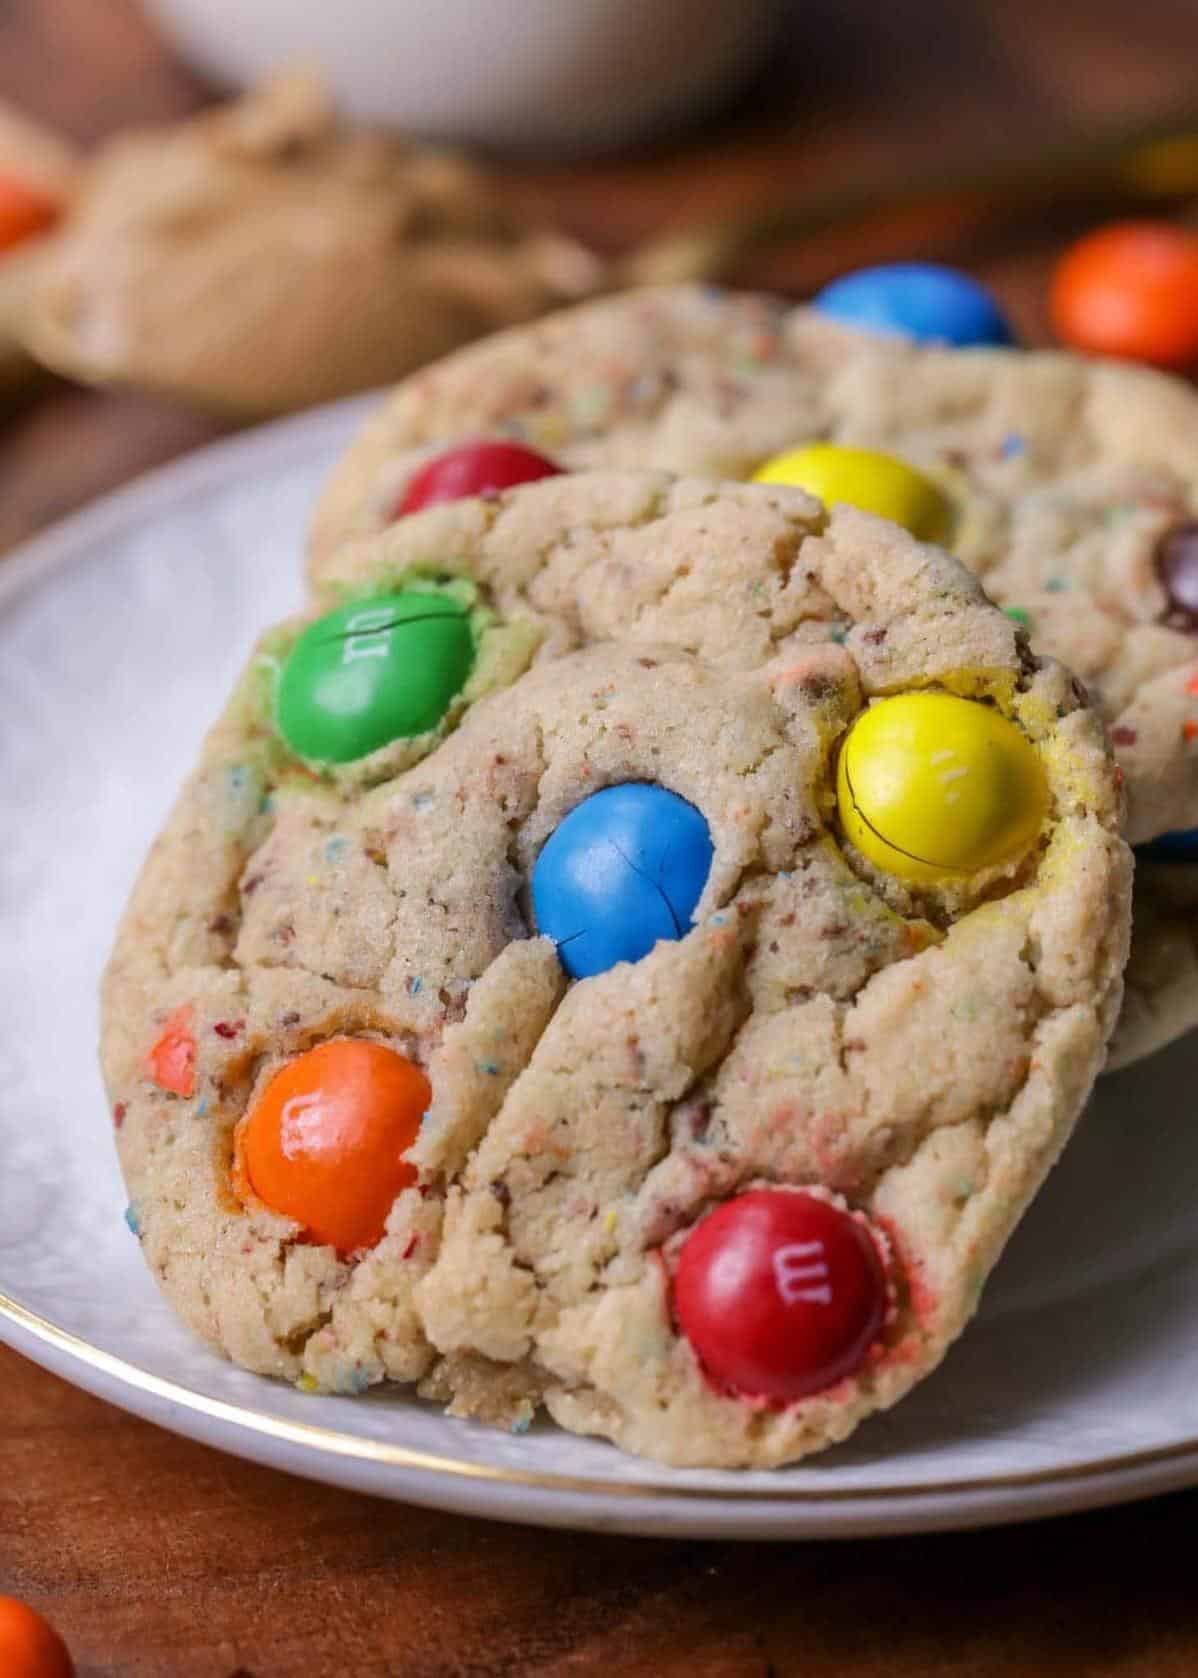  Peanut butter + M&m's + chocolate chips = a trifecta of deliciousness.